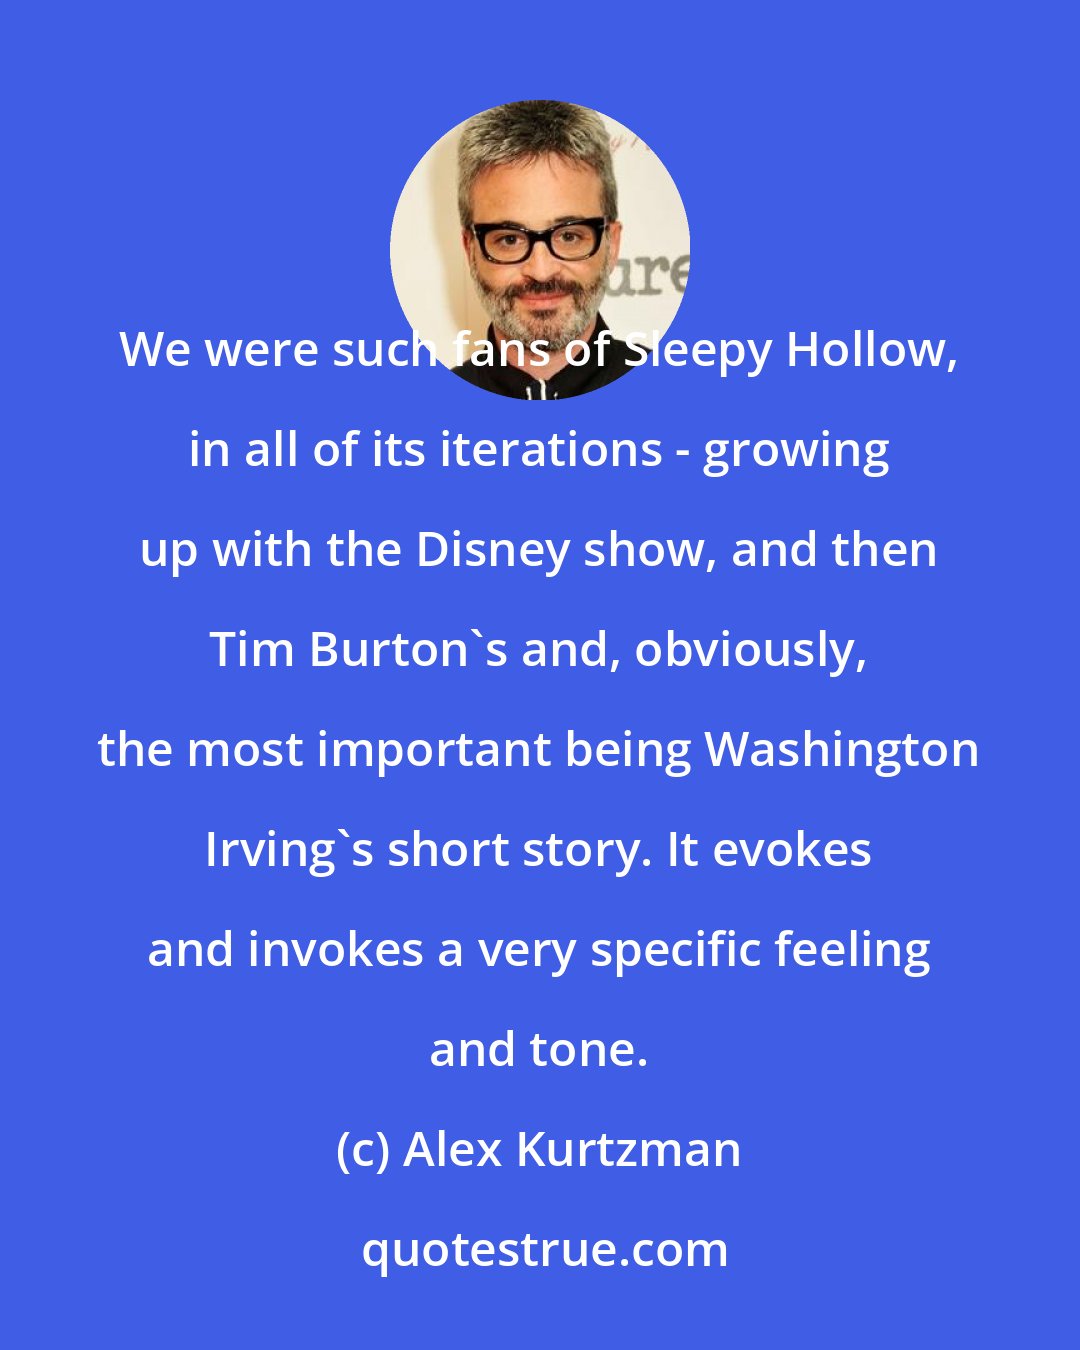 Alex Kurtzman: We were such fans of Sleepy Hollow, in all of its iterations - growing up with the Disney show, and then Tim Burton's and, obviously, the most important being Washington Irving's short story. It evokes and invokes a very specific feeling and tone.